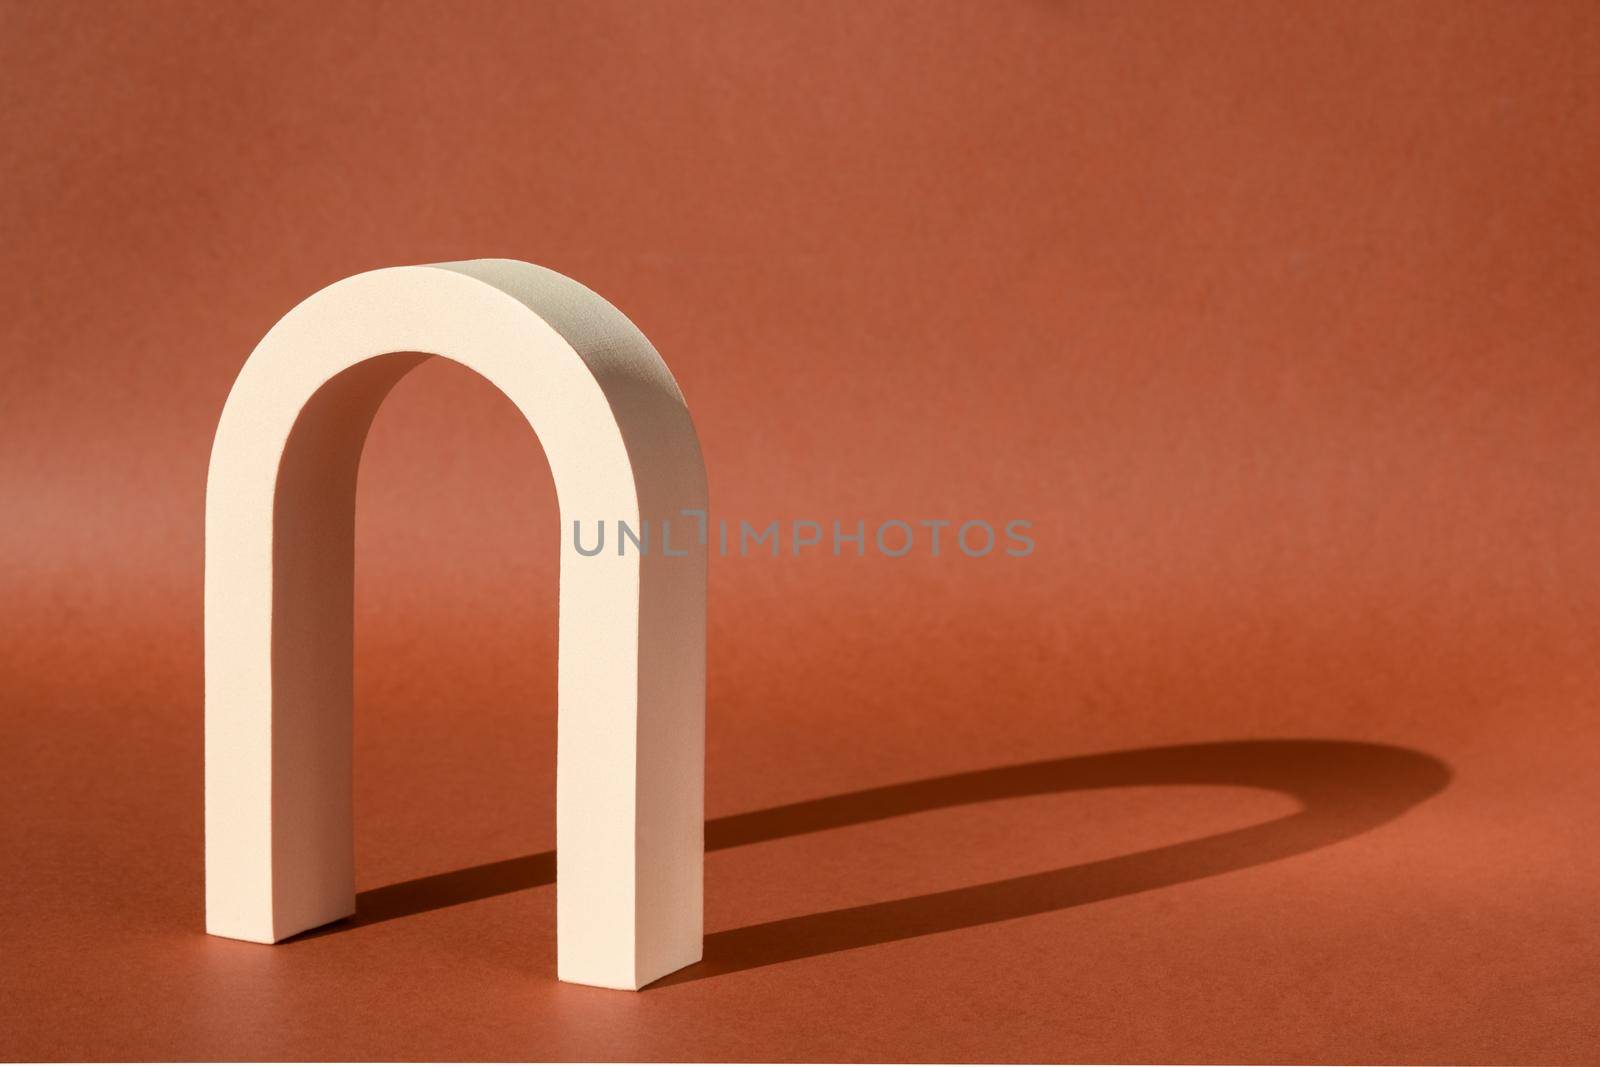 Cosmetic art deco arch podium display pedestal stand. Fashion geometric arch backdrop for product presentation with shadow from sun. Abstract minimal template stage. Modern scene mockup showcase